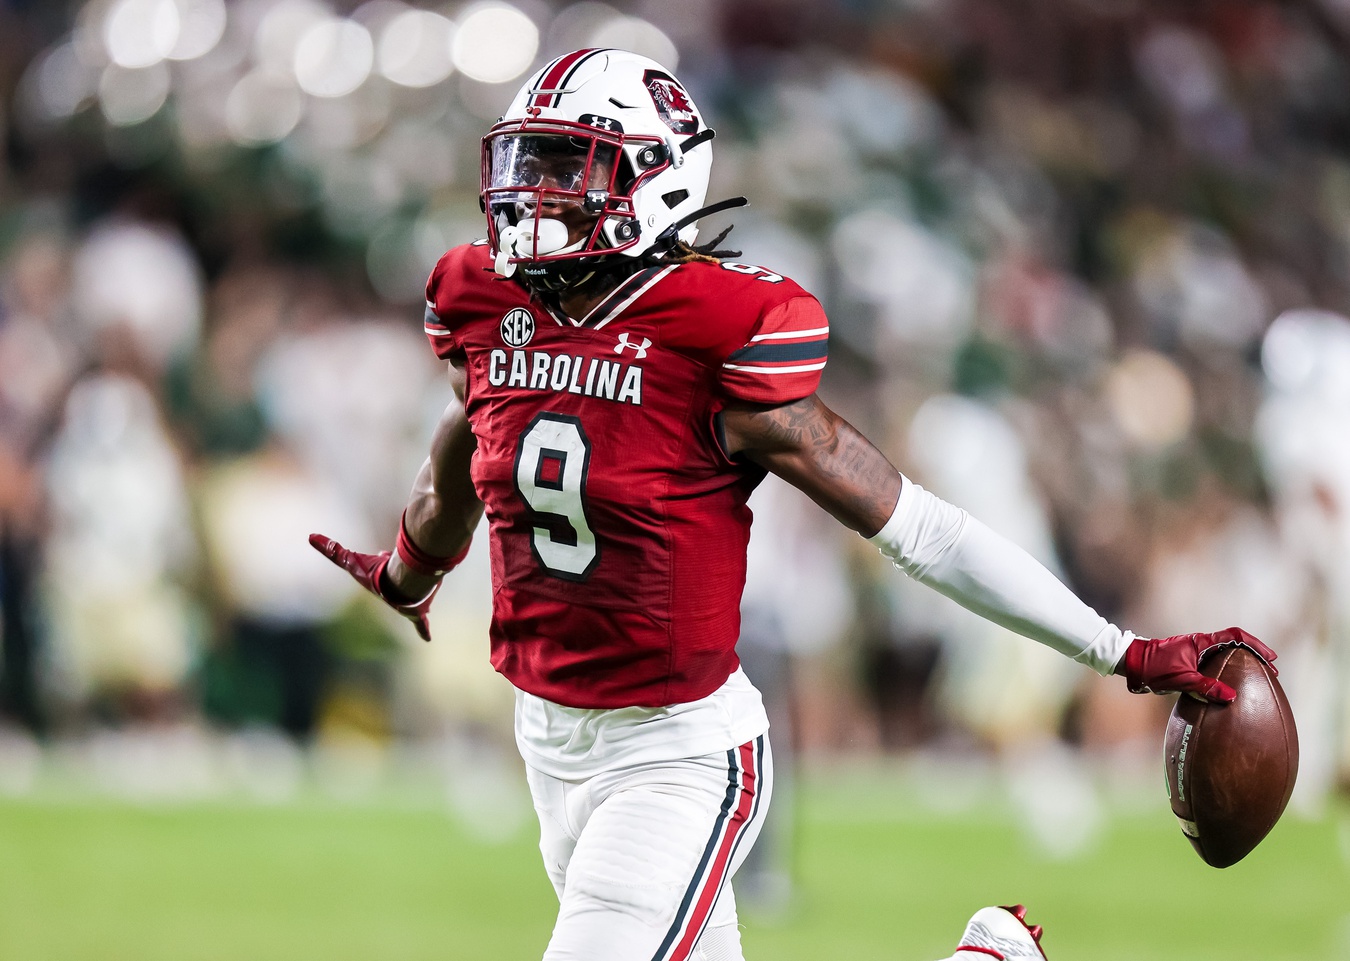 Final 2022 NFL Draft Projections For South Carolina Players